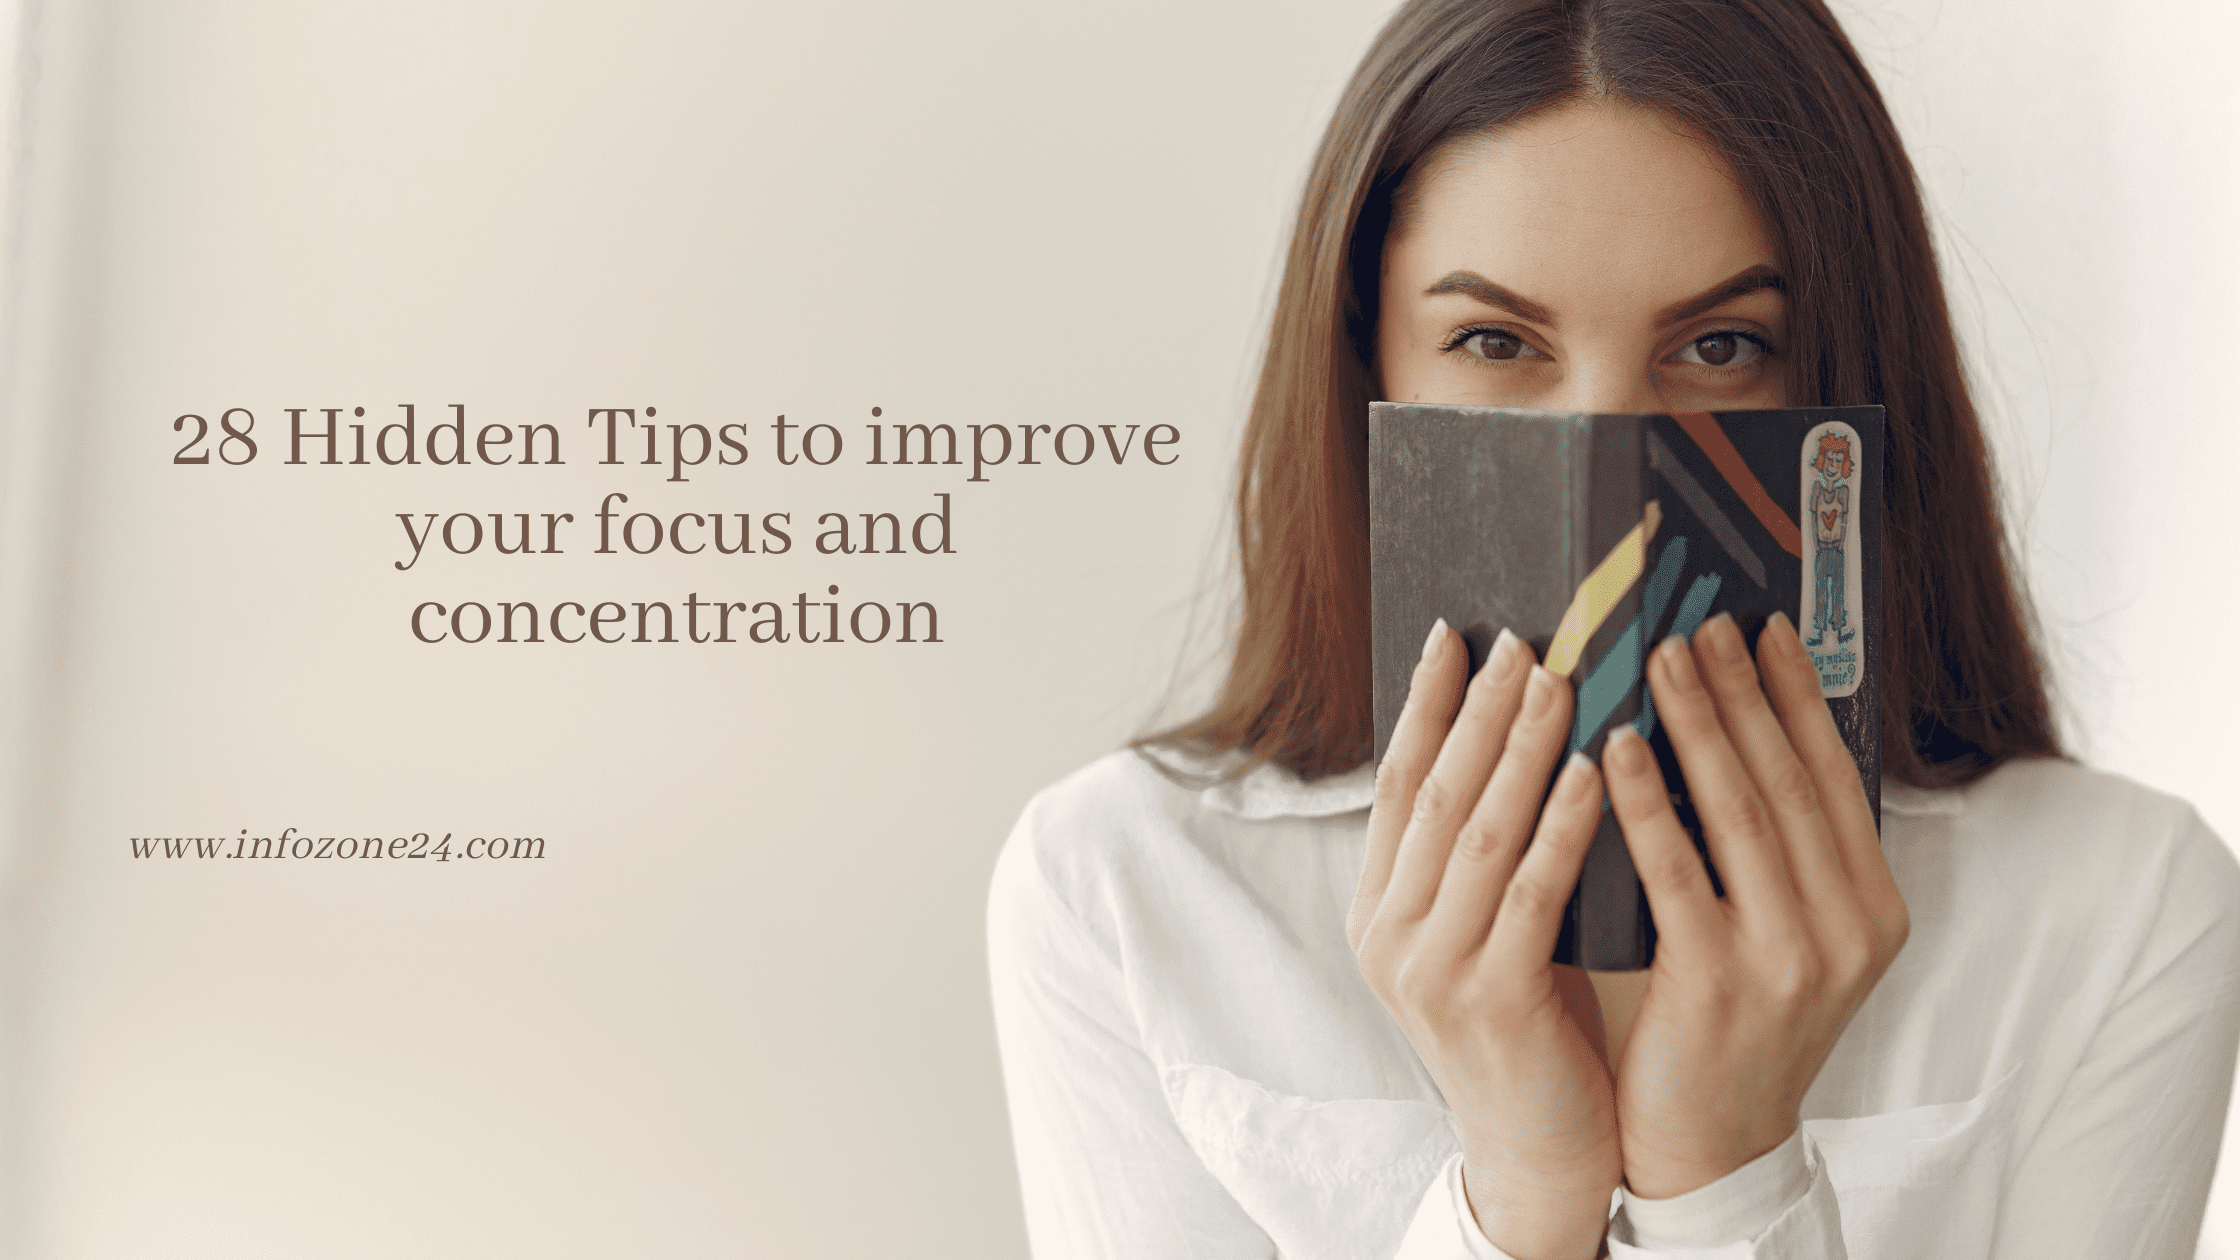 28-Hidden-Tips-to-improve-your-focus-and-concentration.png